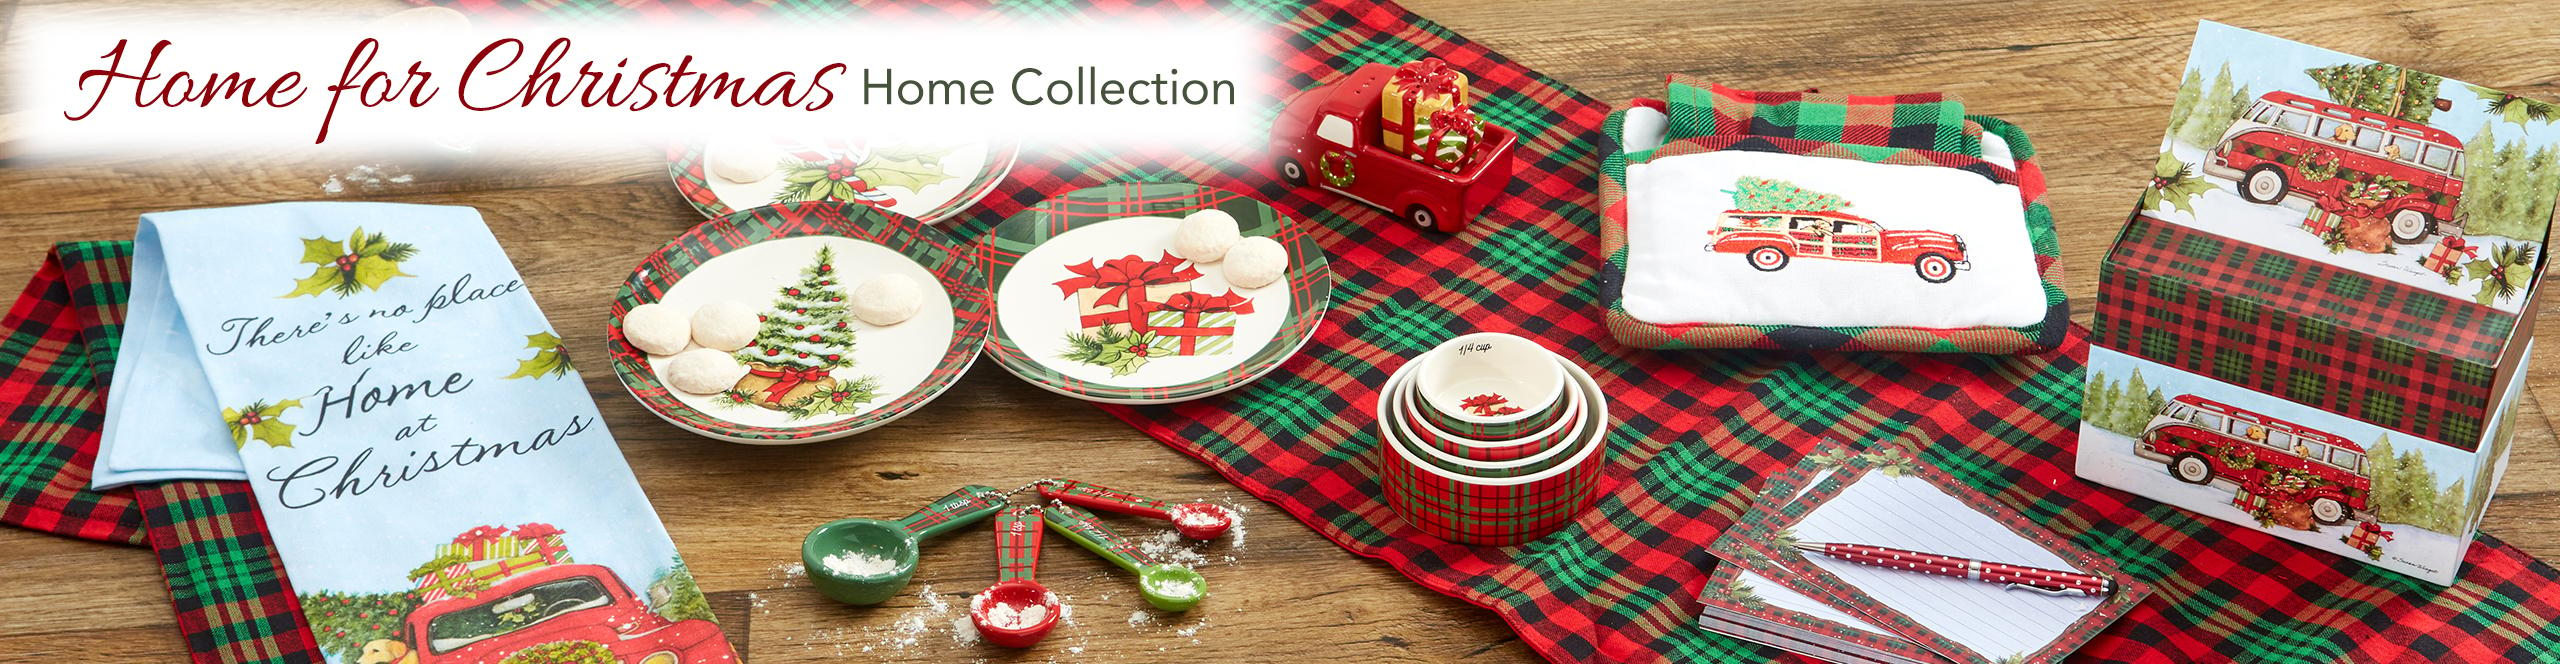 Shop the Home for Christmas Collection at LANG.com!